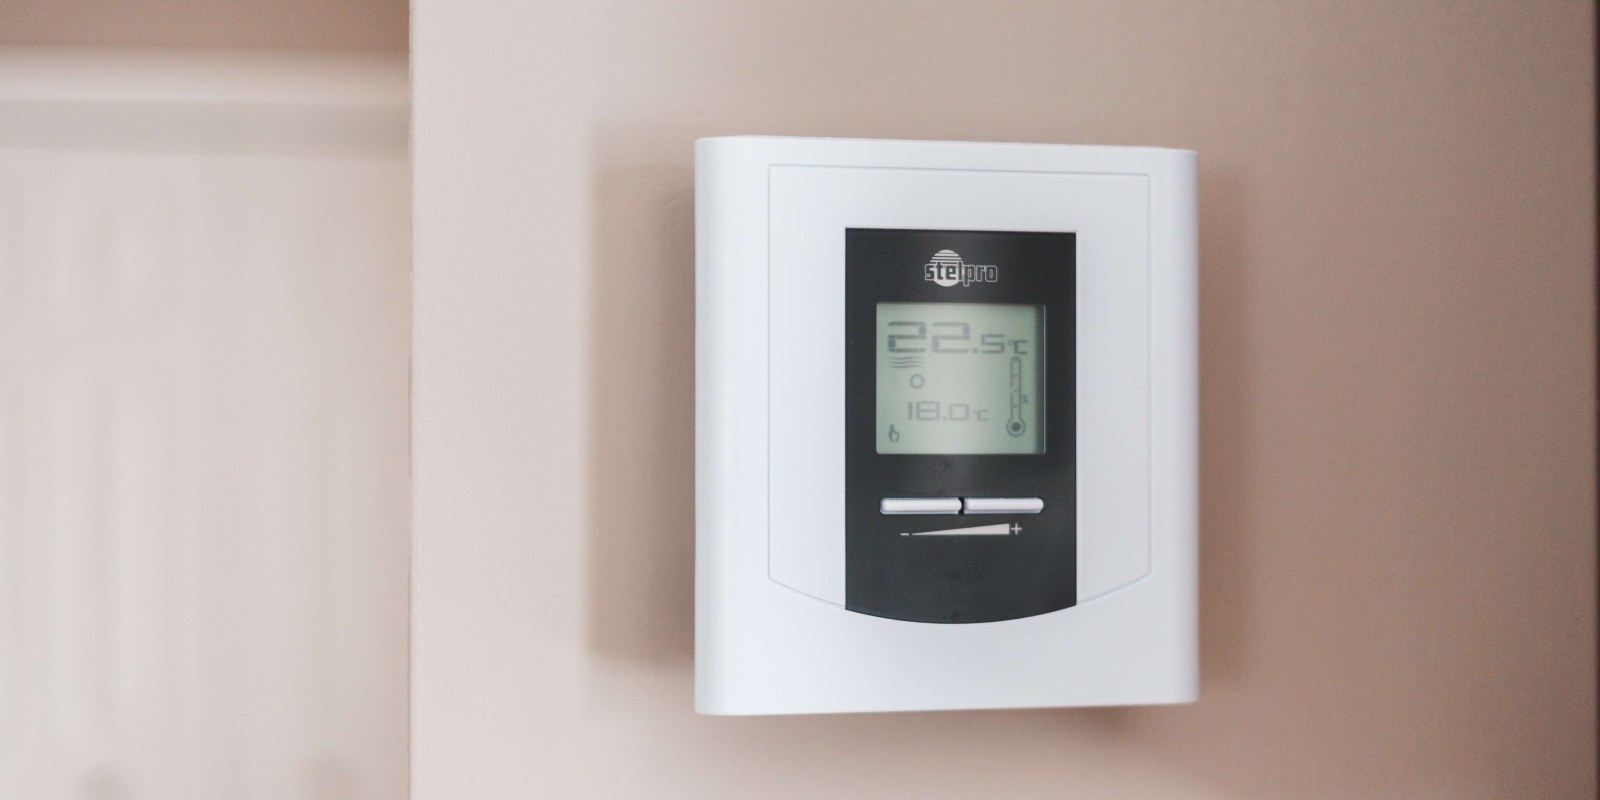 Photo: Thermostat (Source: Pexels)